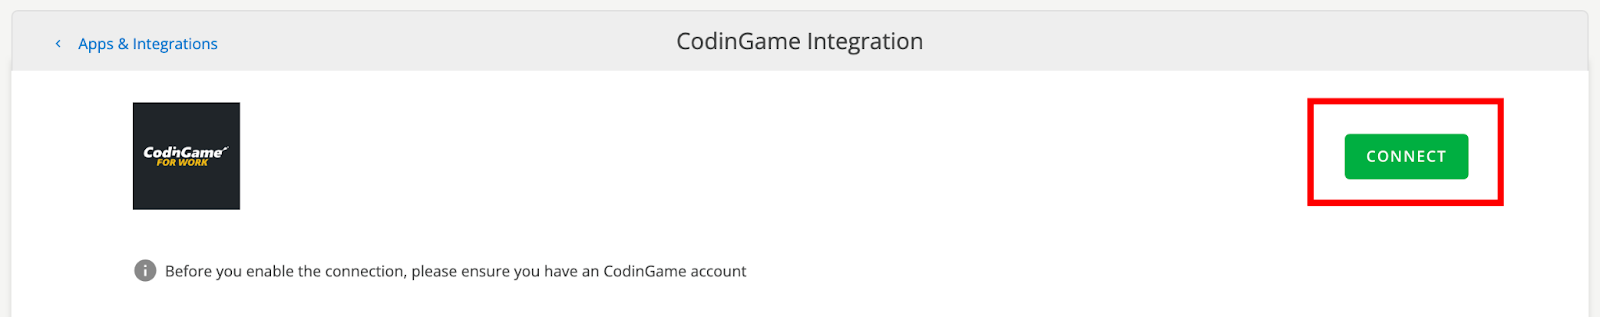 The codingame integration page in smartrecruiters is shown with the "connect" button on the right highlighted.